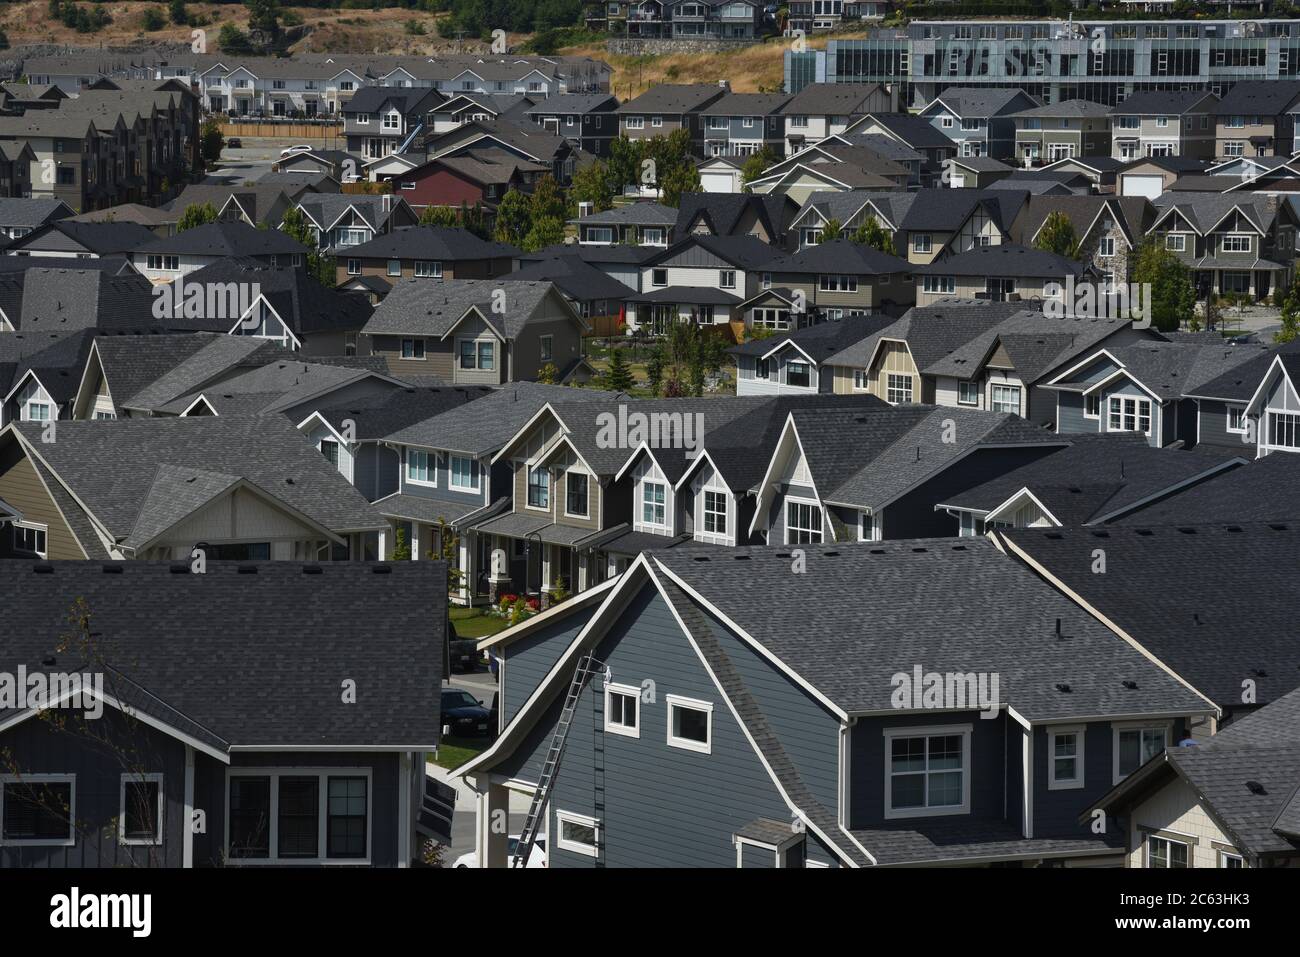 Houses crowd the streets of the Royal Bay development in Colwood, British Columbia, Canada. At top right is Royal Bay Secondary School. Colwood is a s Stock Photo